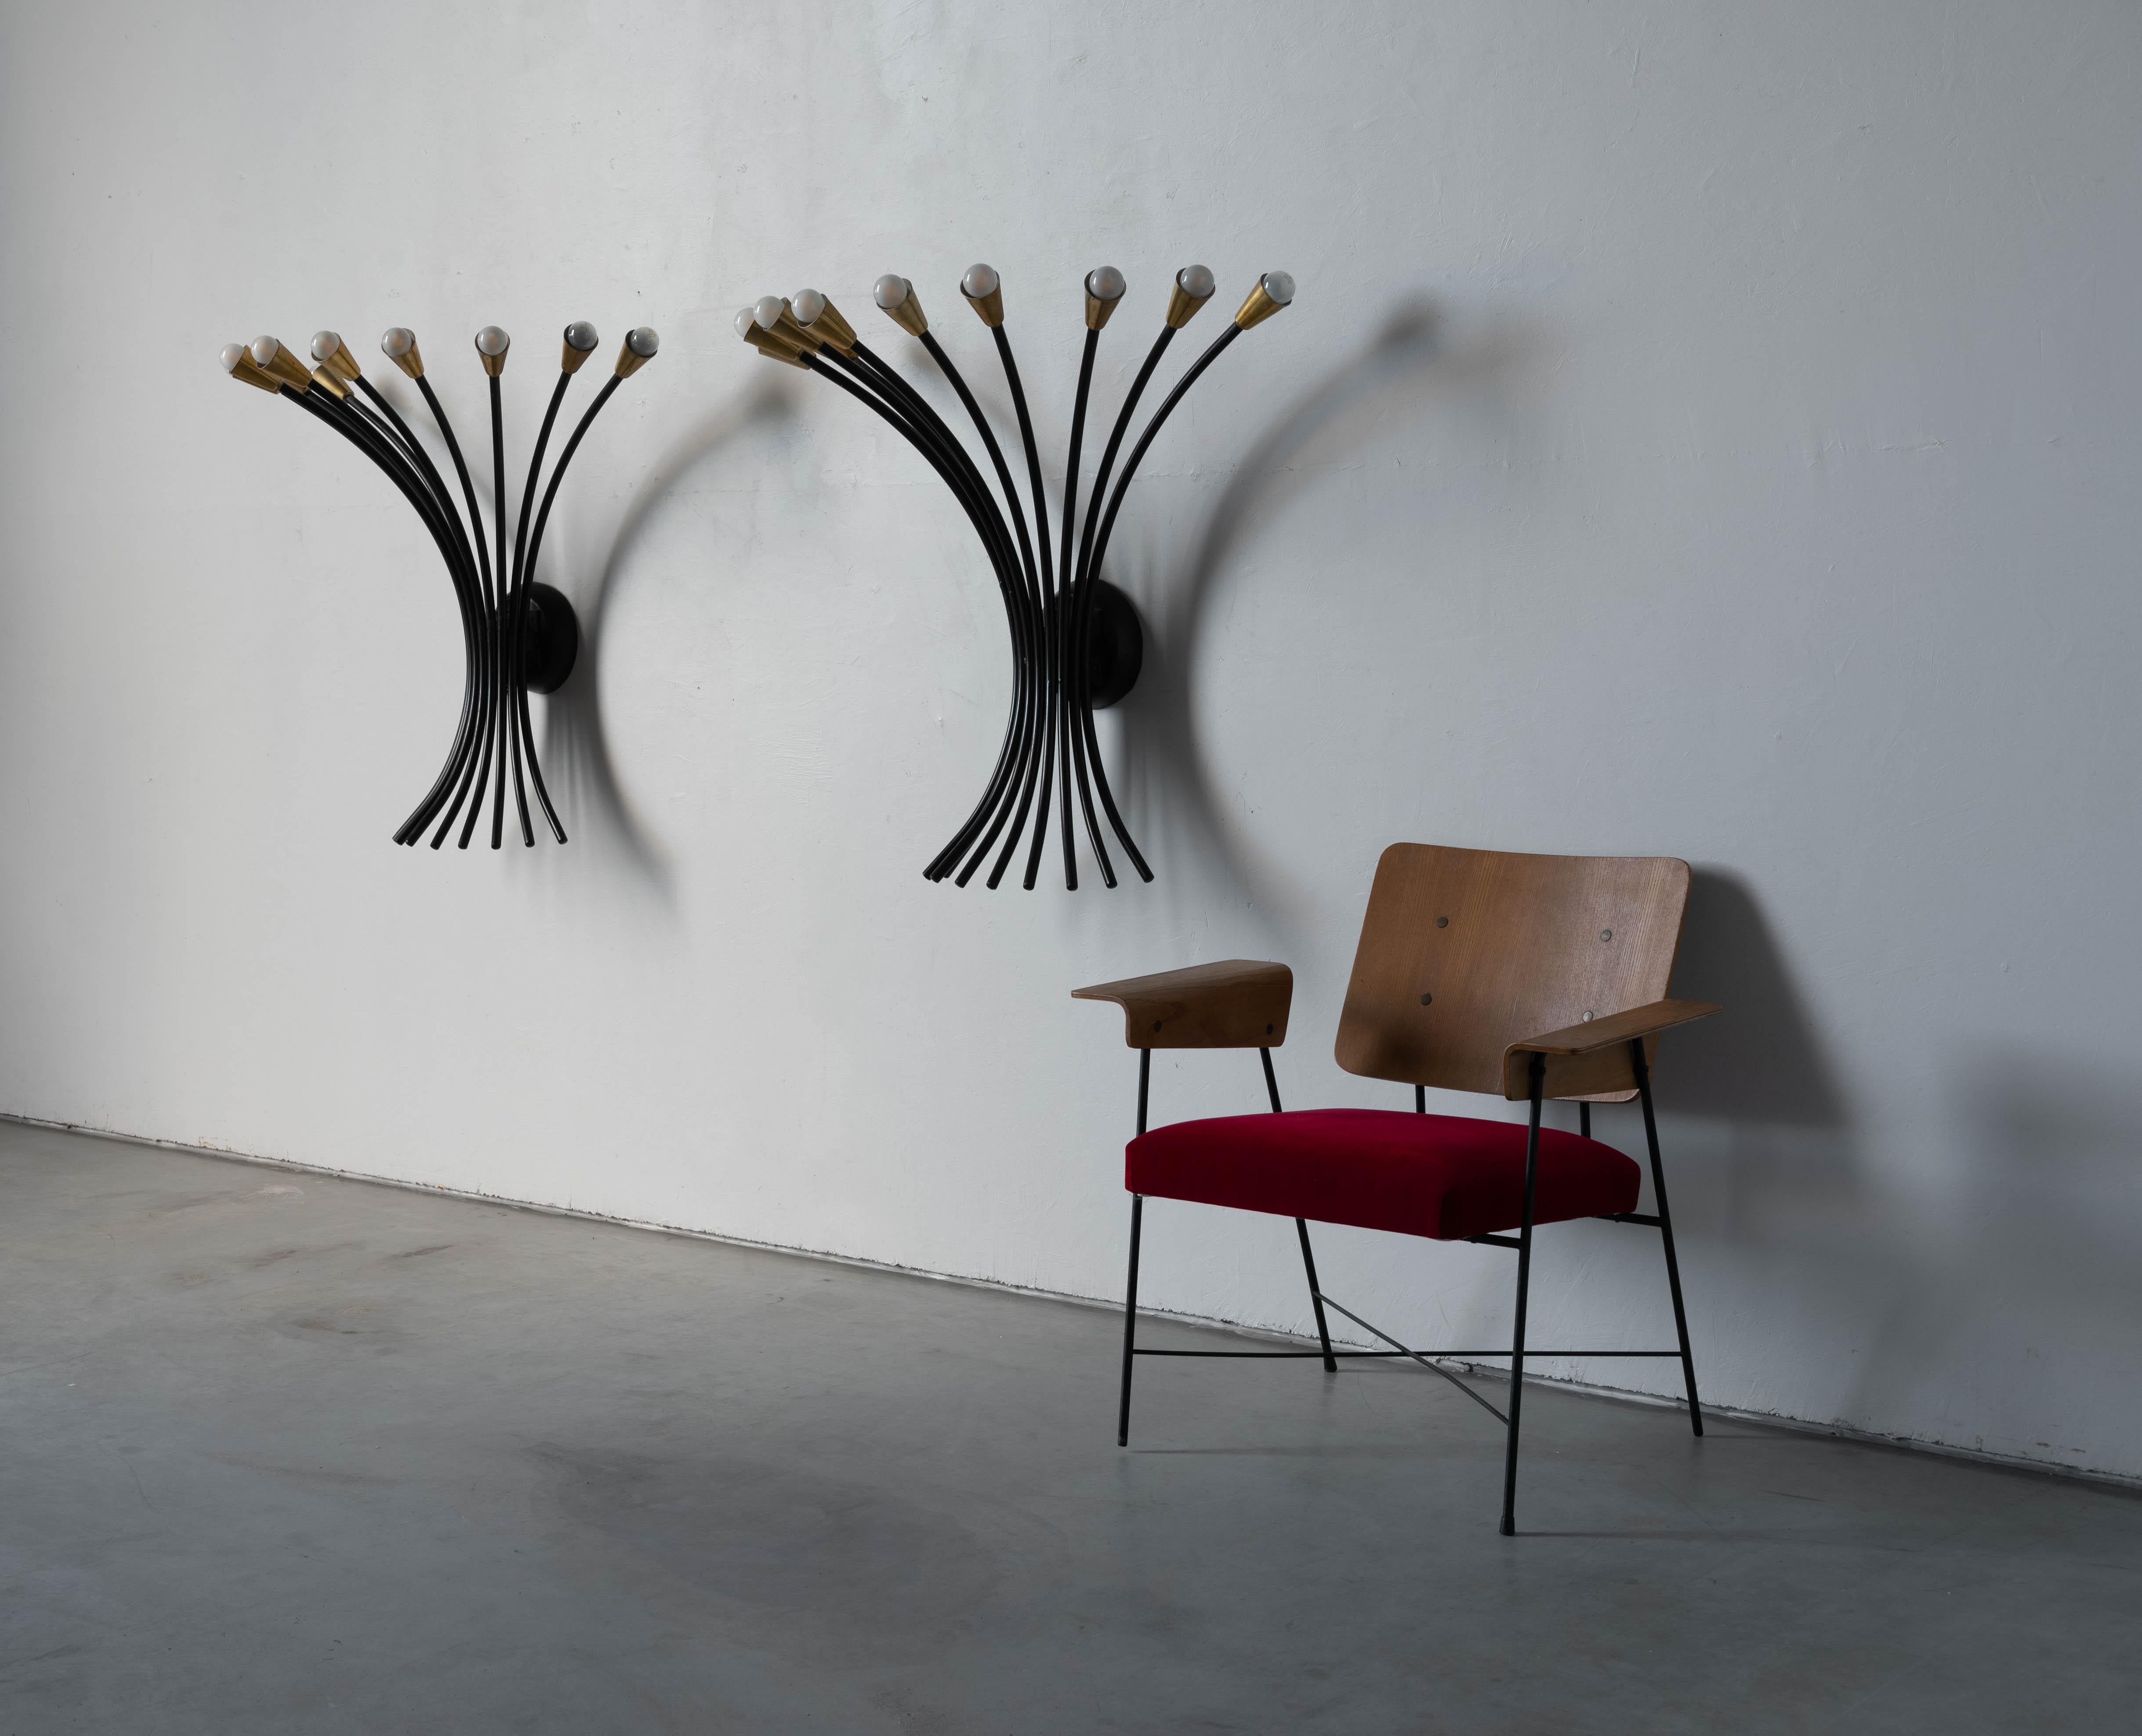 Late 20th Century Italian Designer, Large Sconces, Brass, Black-Lacquered Metal, Italy, 1960s